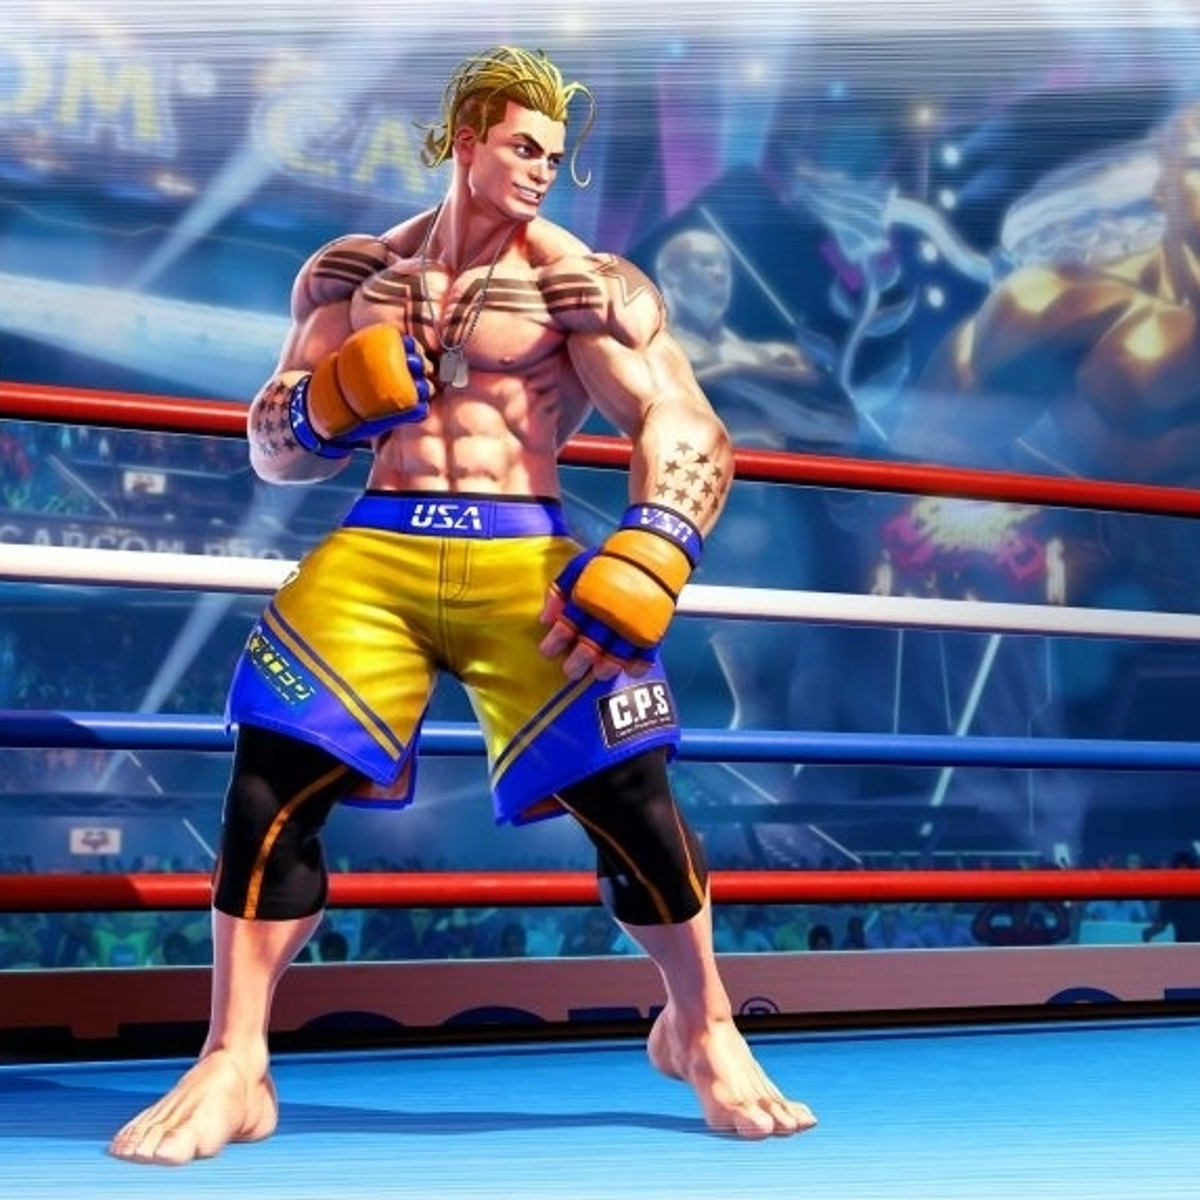 Street Fighter 5's final character, Luke, is a major part of the next Street  Fighter game